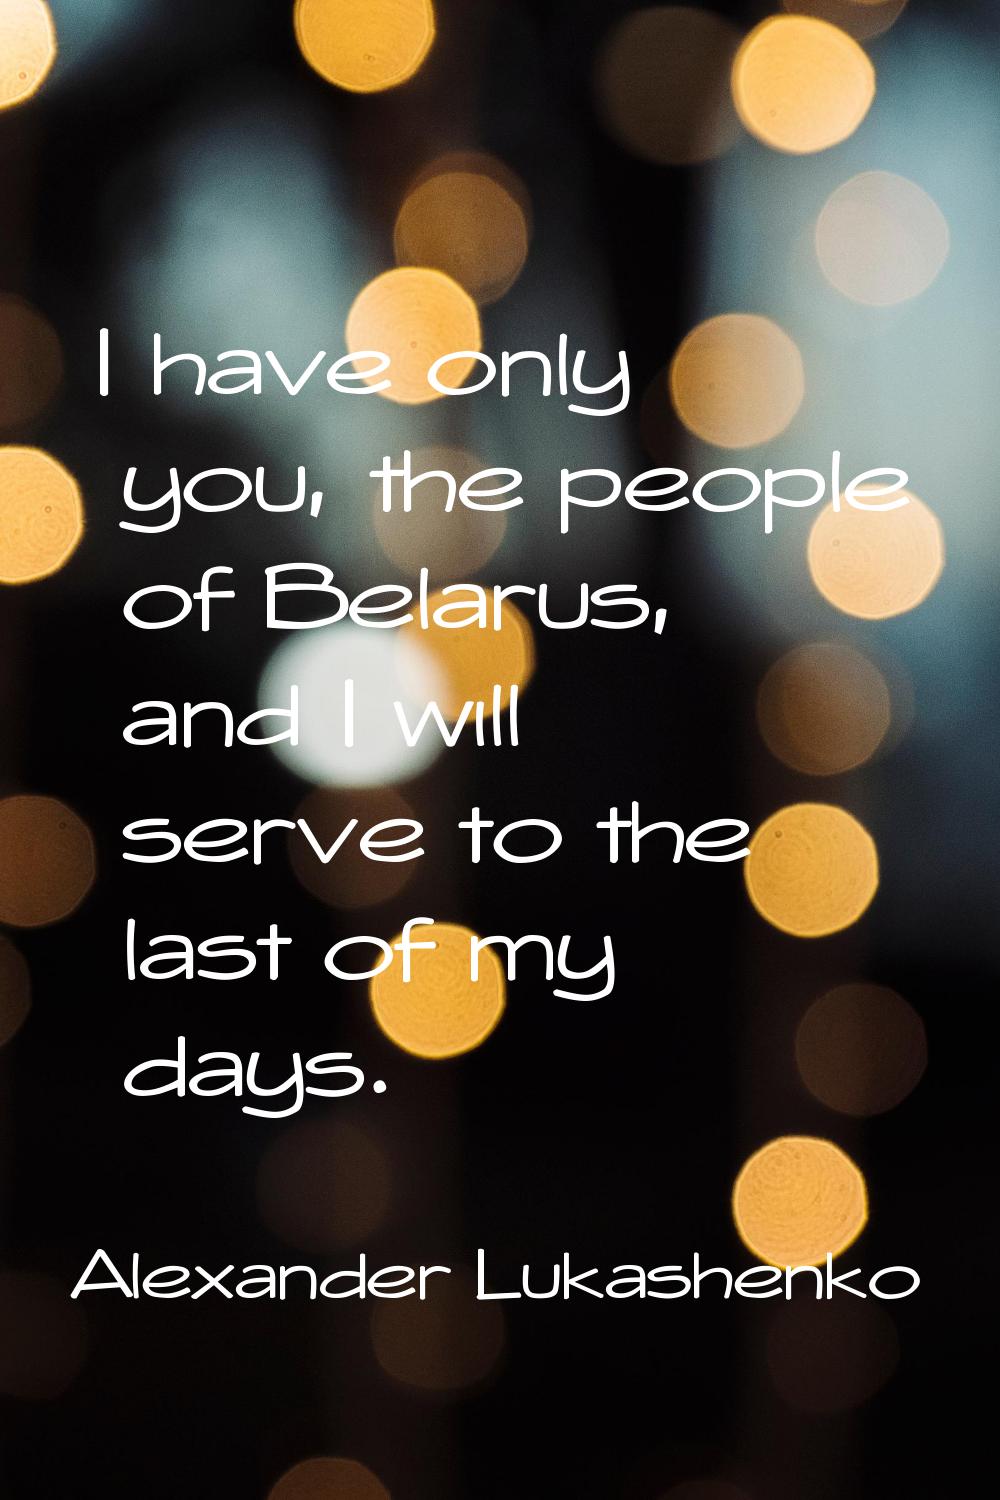 I have only you, the people of Belarus, and I will serve to the last of my days.